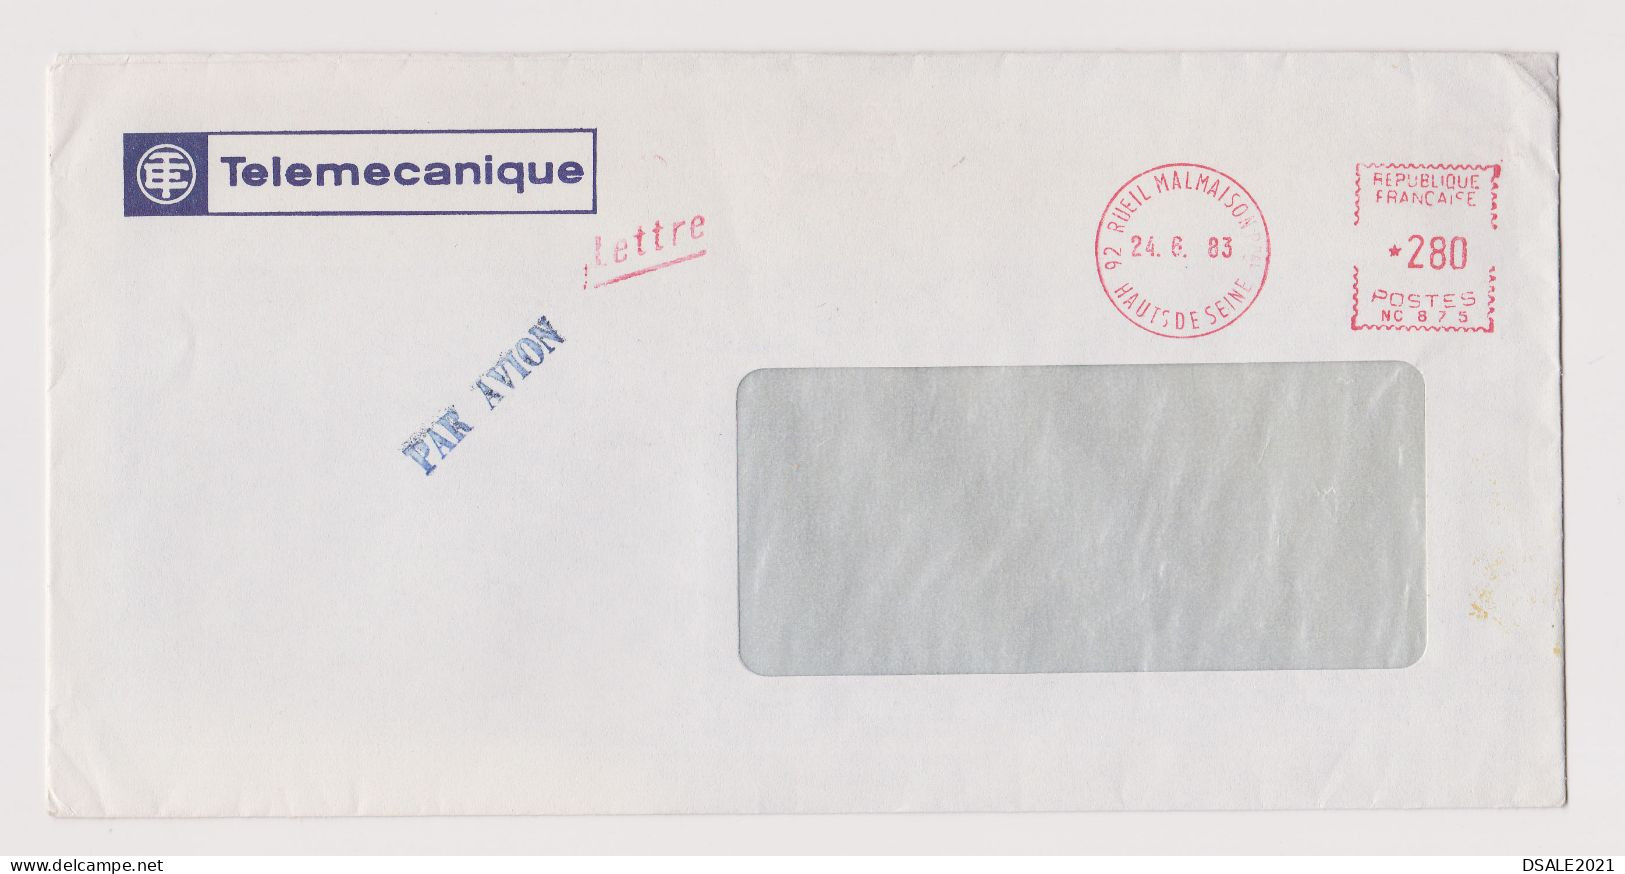 France 1983 Airmail Window Cover With Advertising Machine EMA METER Stamp Cachet, Sent Abroad (66856) - Brieven En Documenten